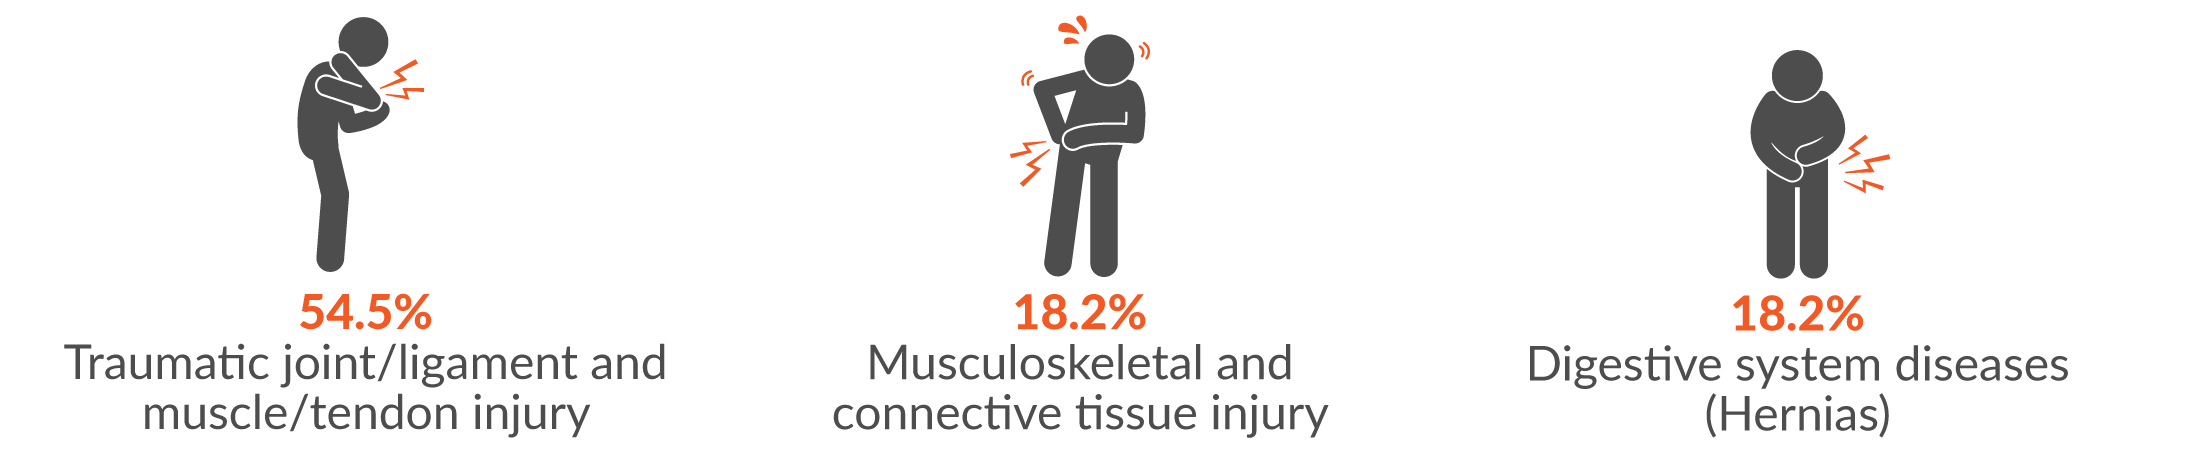 54.5% traumatic joint/ligament and muscle/tendon injury; 18.2% musculoskeletal and connective tissue diseases; and digestive system diseases (hernias).